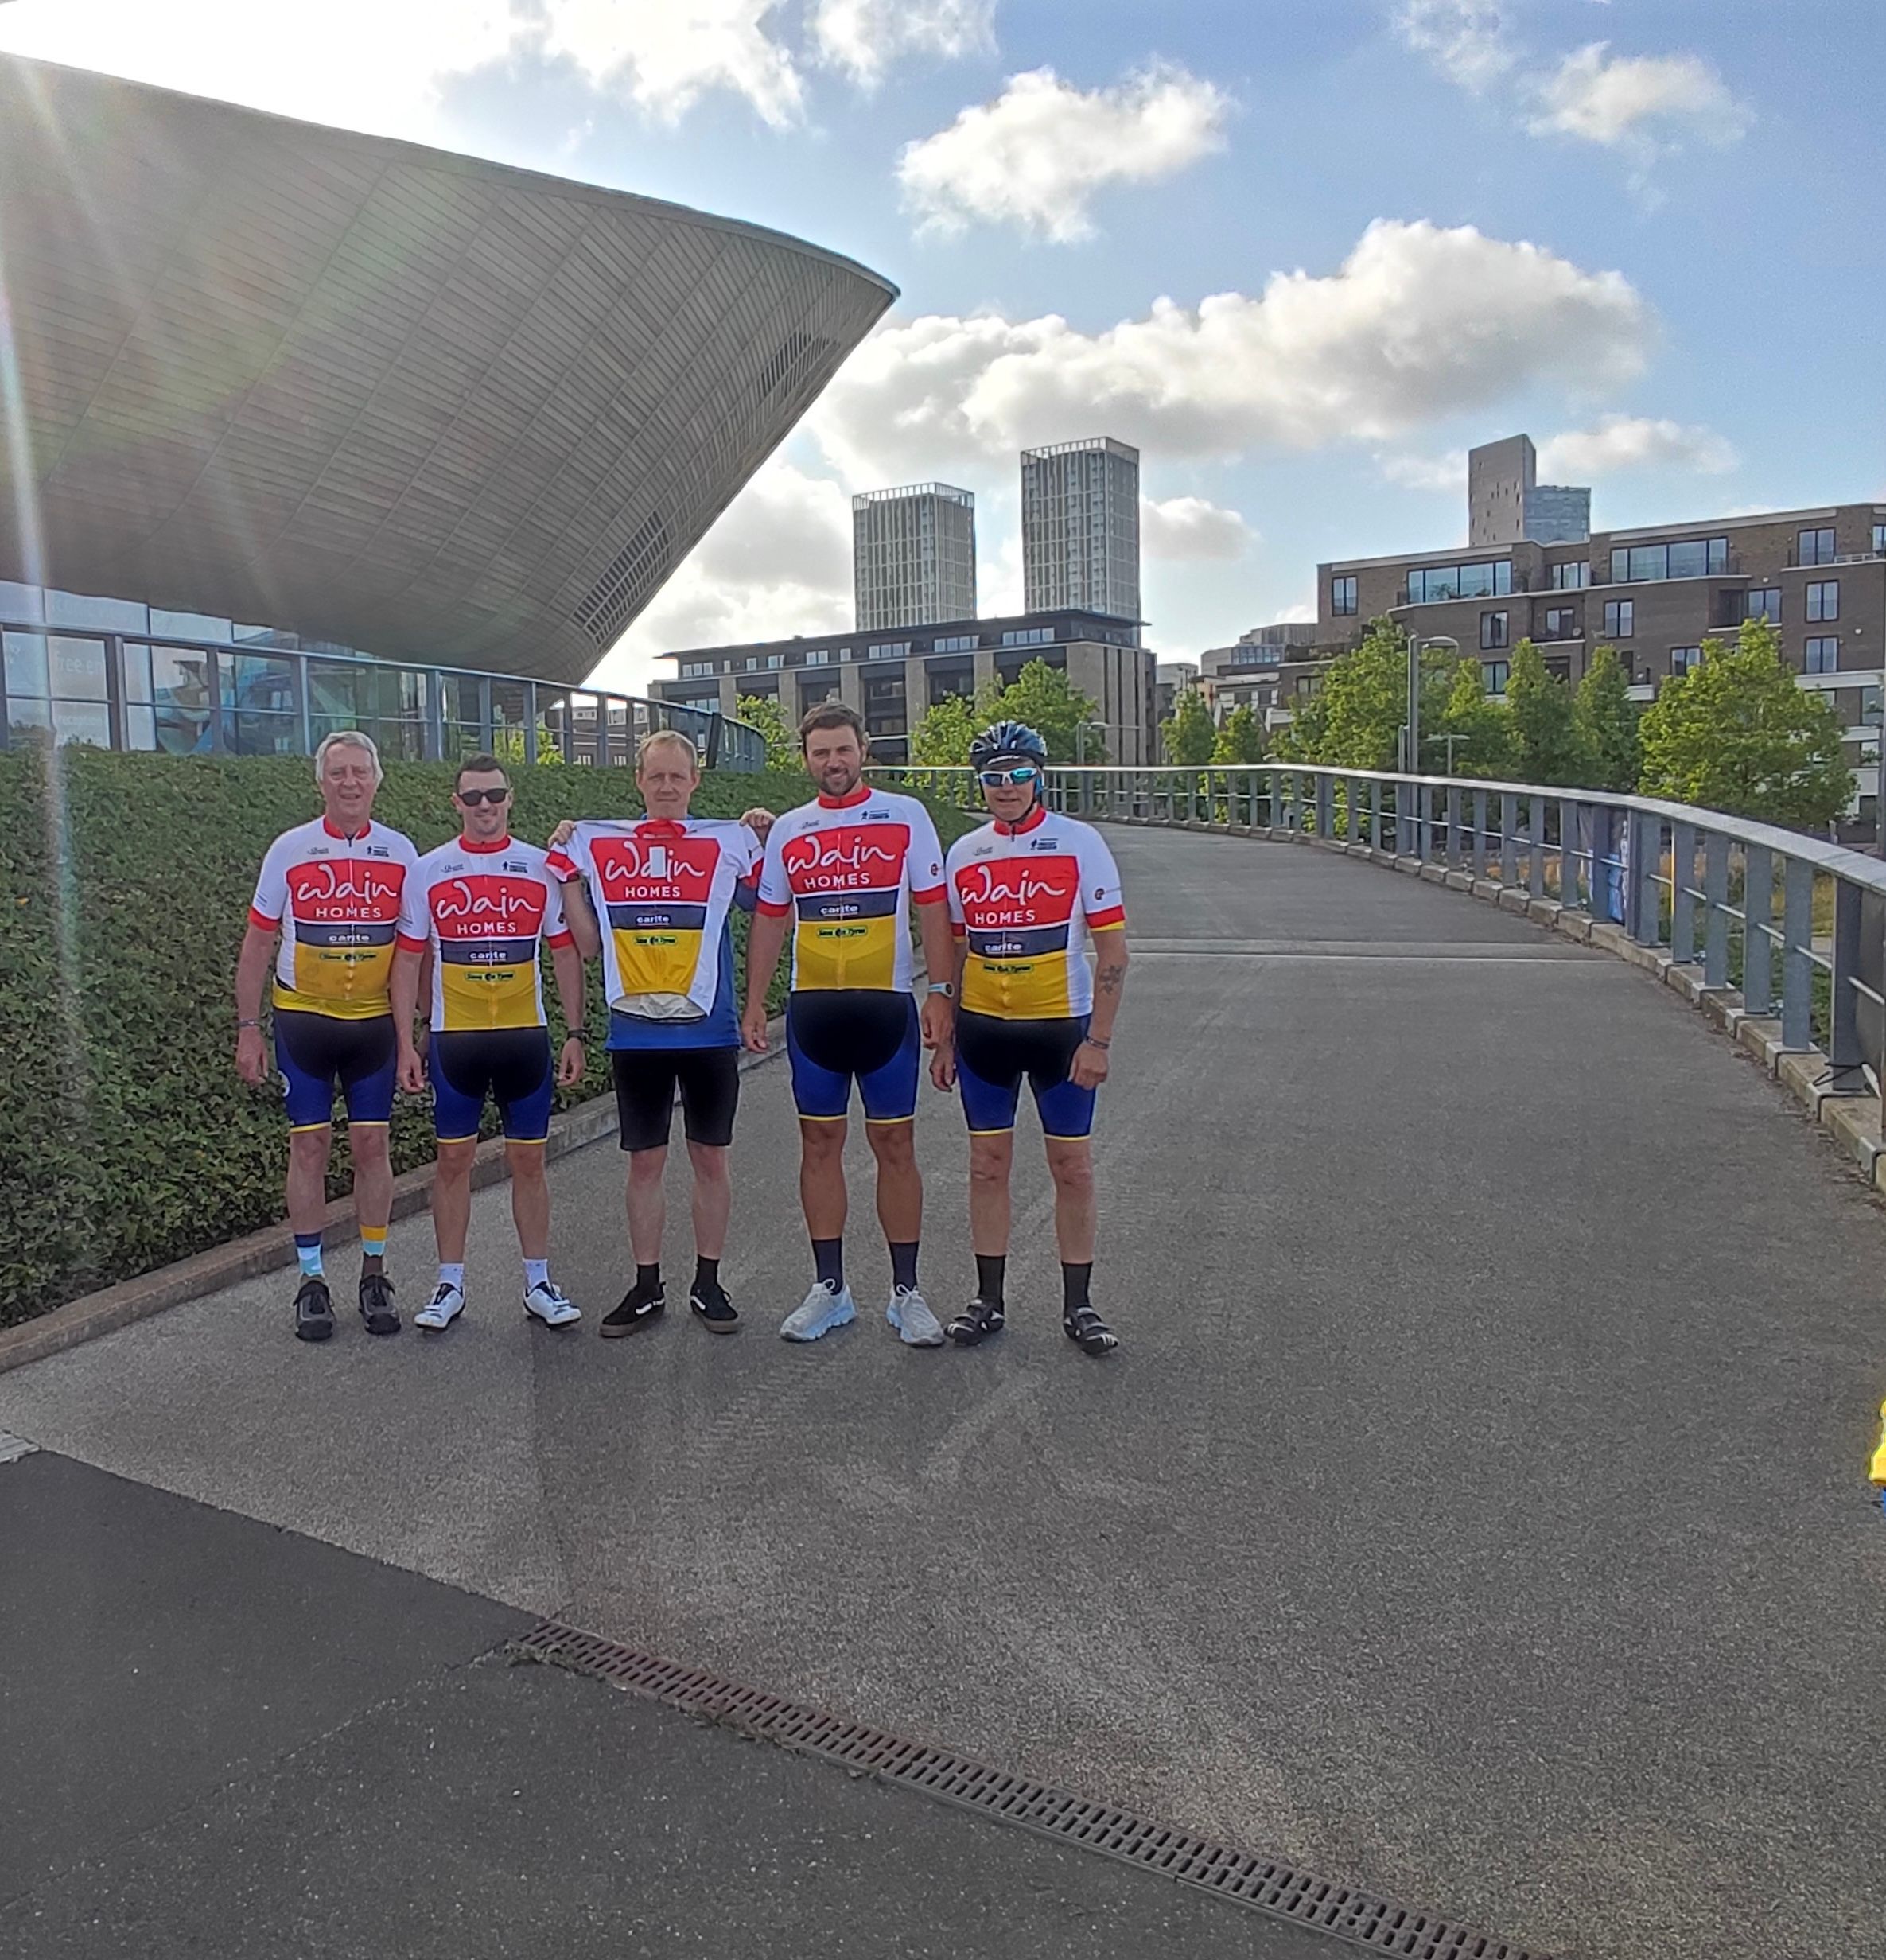 Five men are standing in cycling wear against the background of a stadium